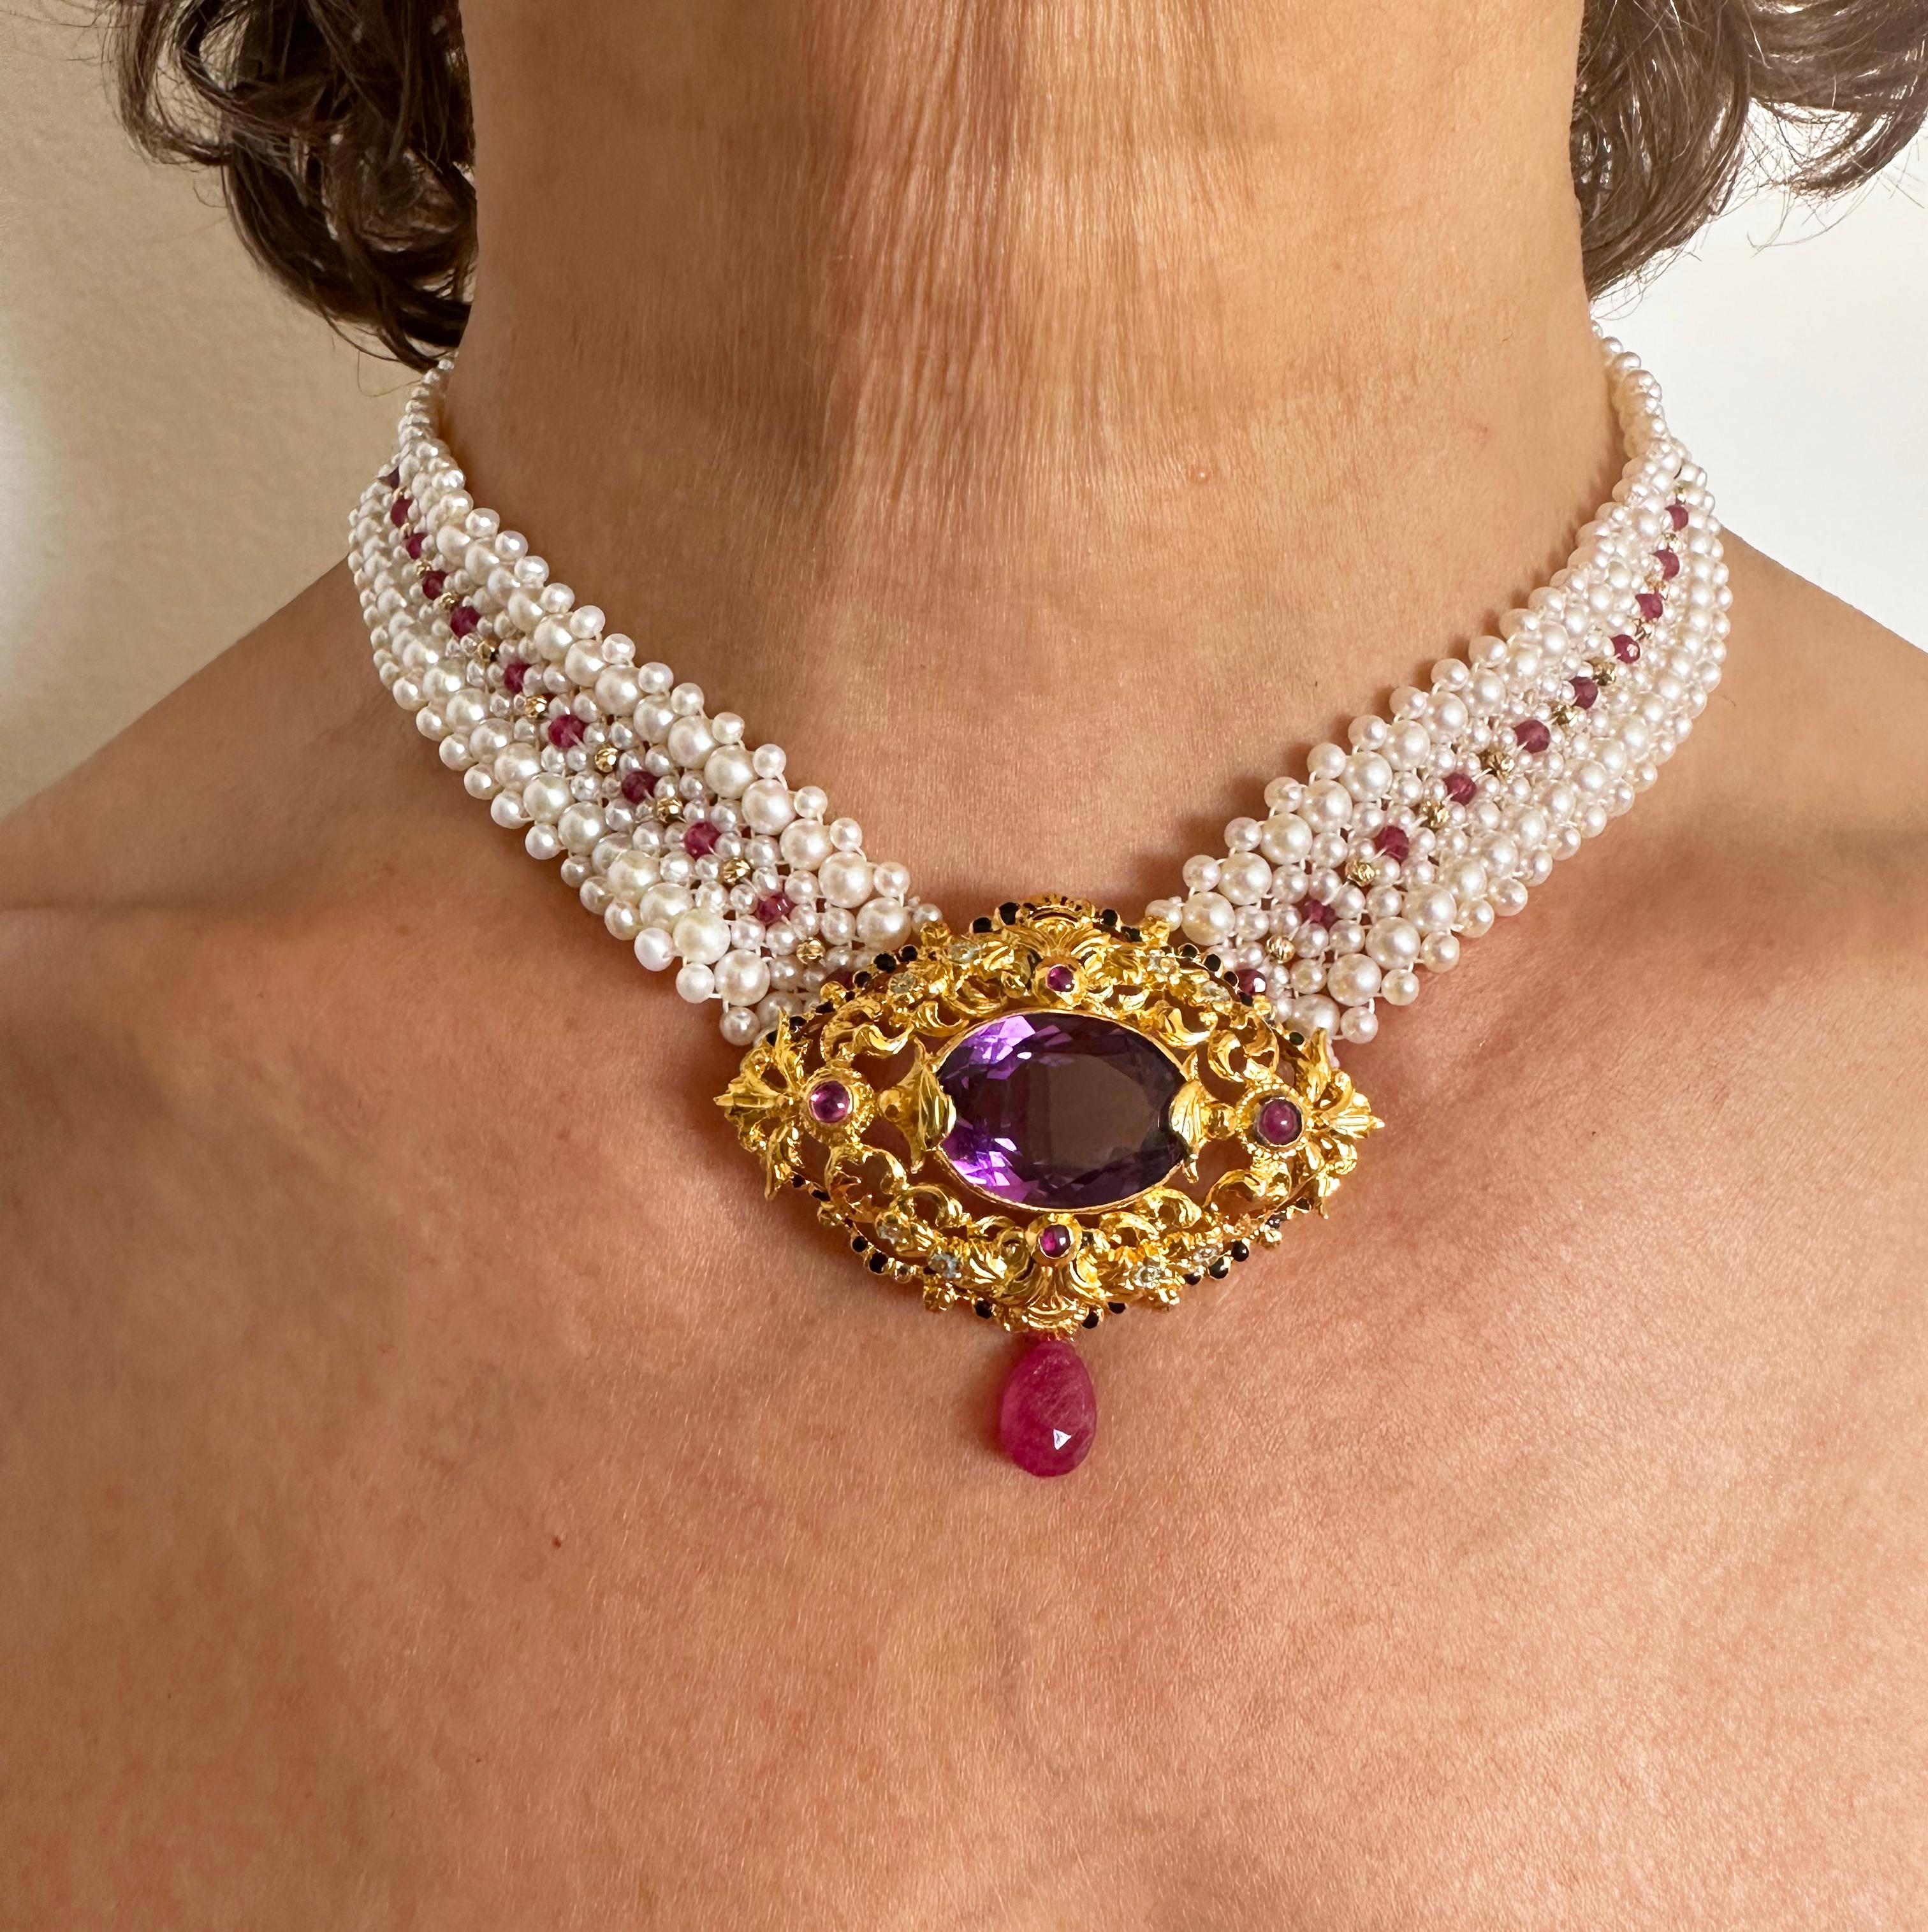 Marina J. Woven Pearl, Ruby & Gold Necklace with Vintage Gold & Amethyst Brooch 6